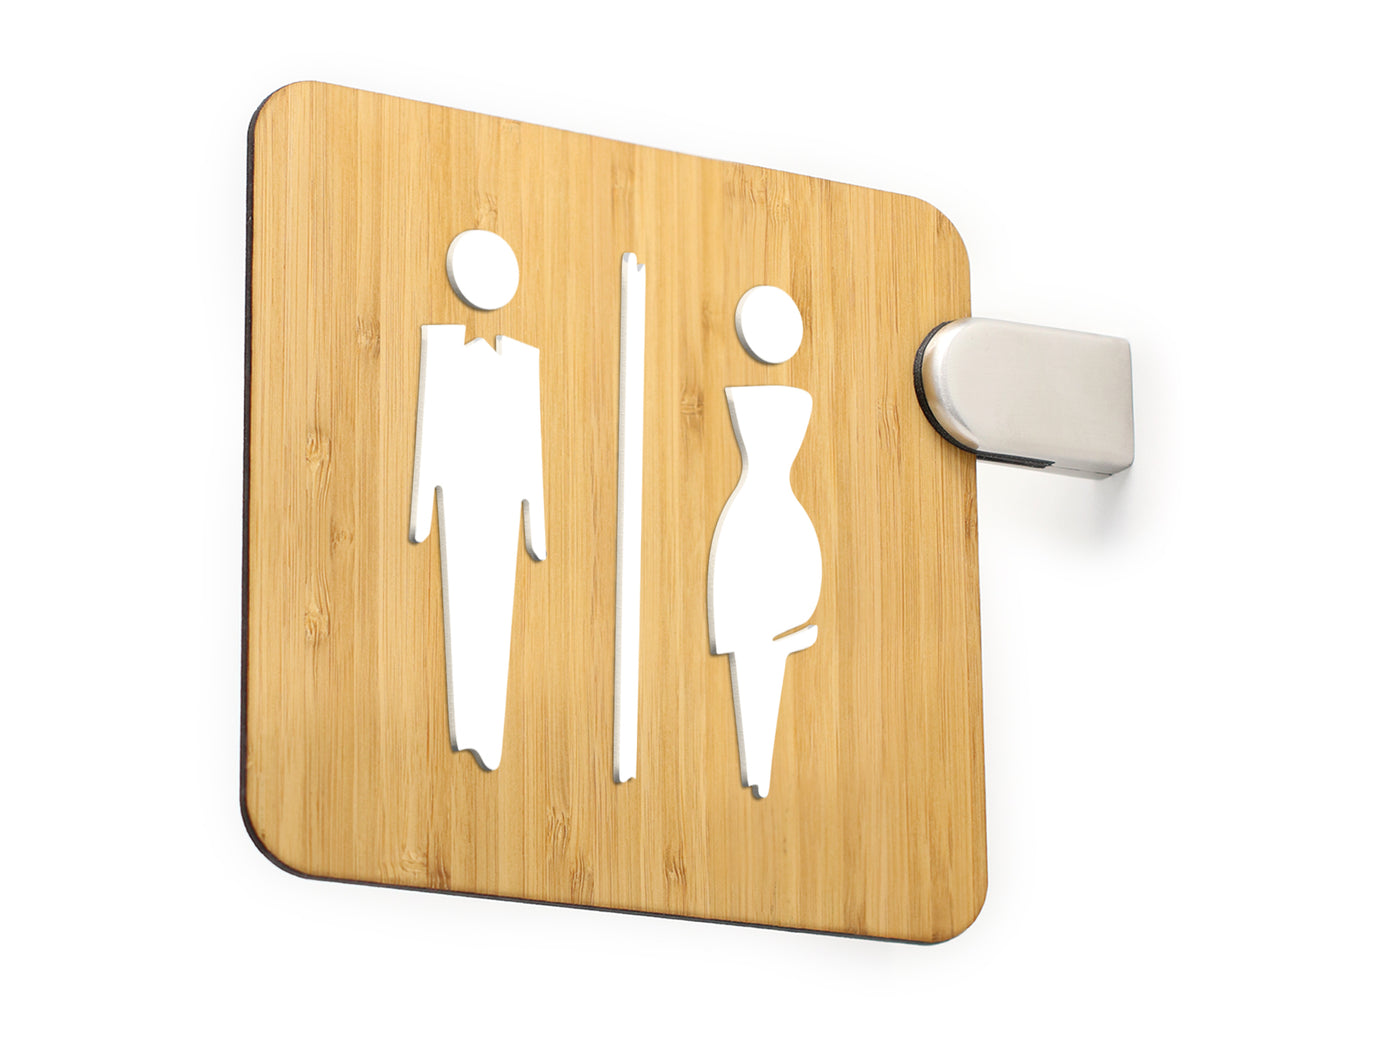 Elegant - Restroom double sided Projecting sign - Symbols of your choice